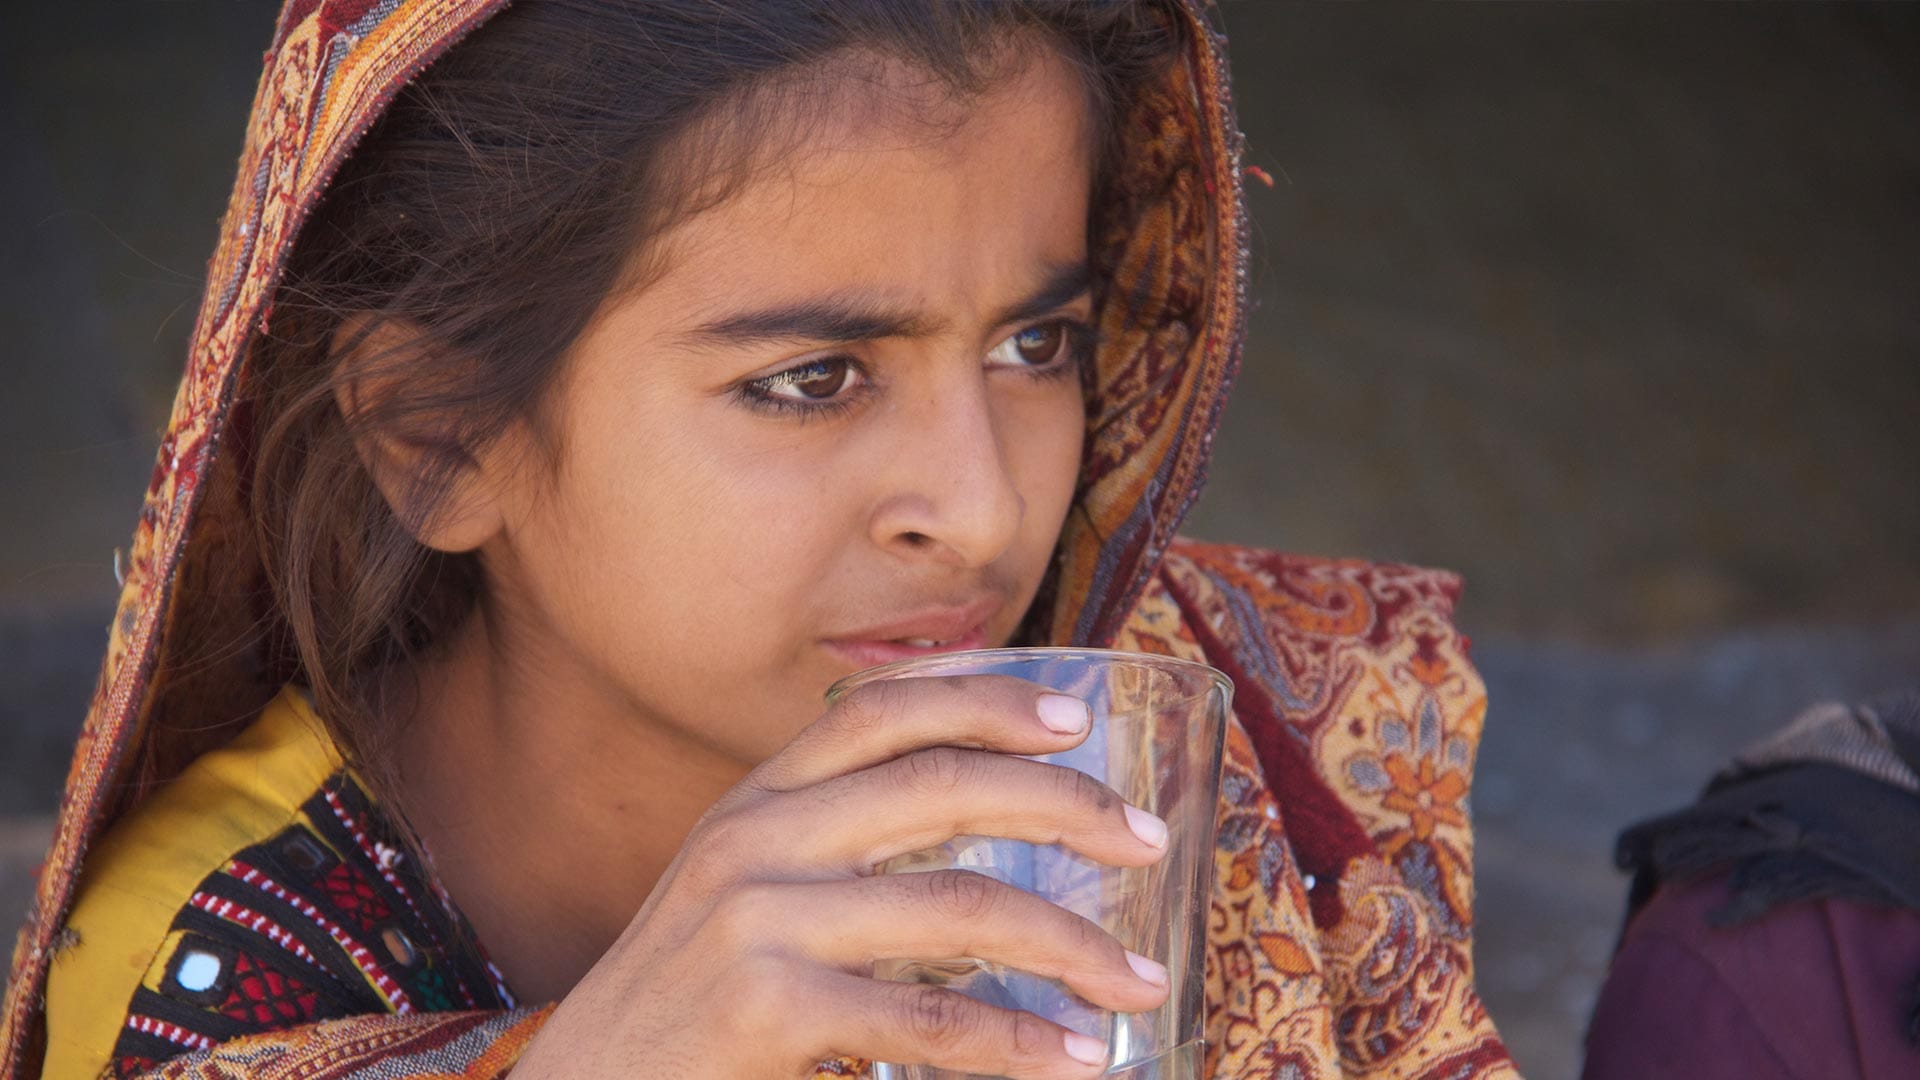 A Pakistani girl holding a glass of water